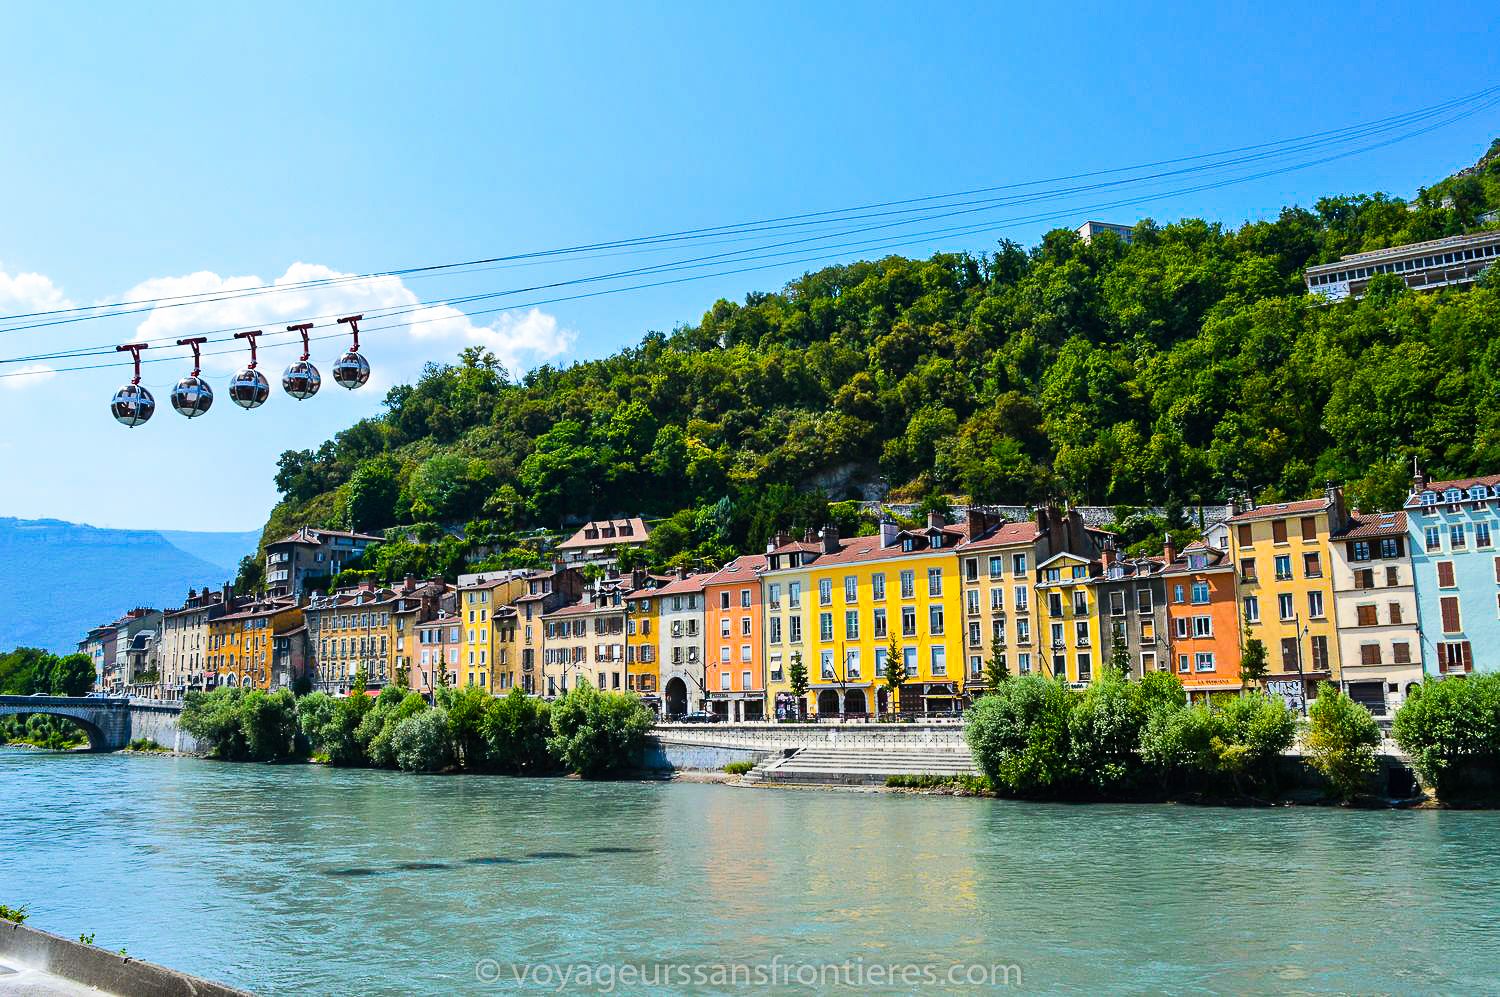 Bastille's cable cars from the docks - Grenoble, France